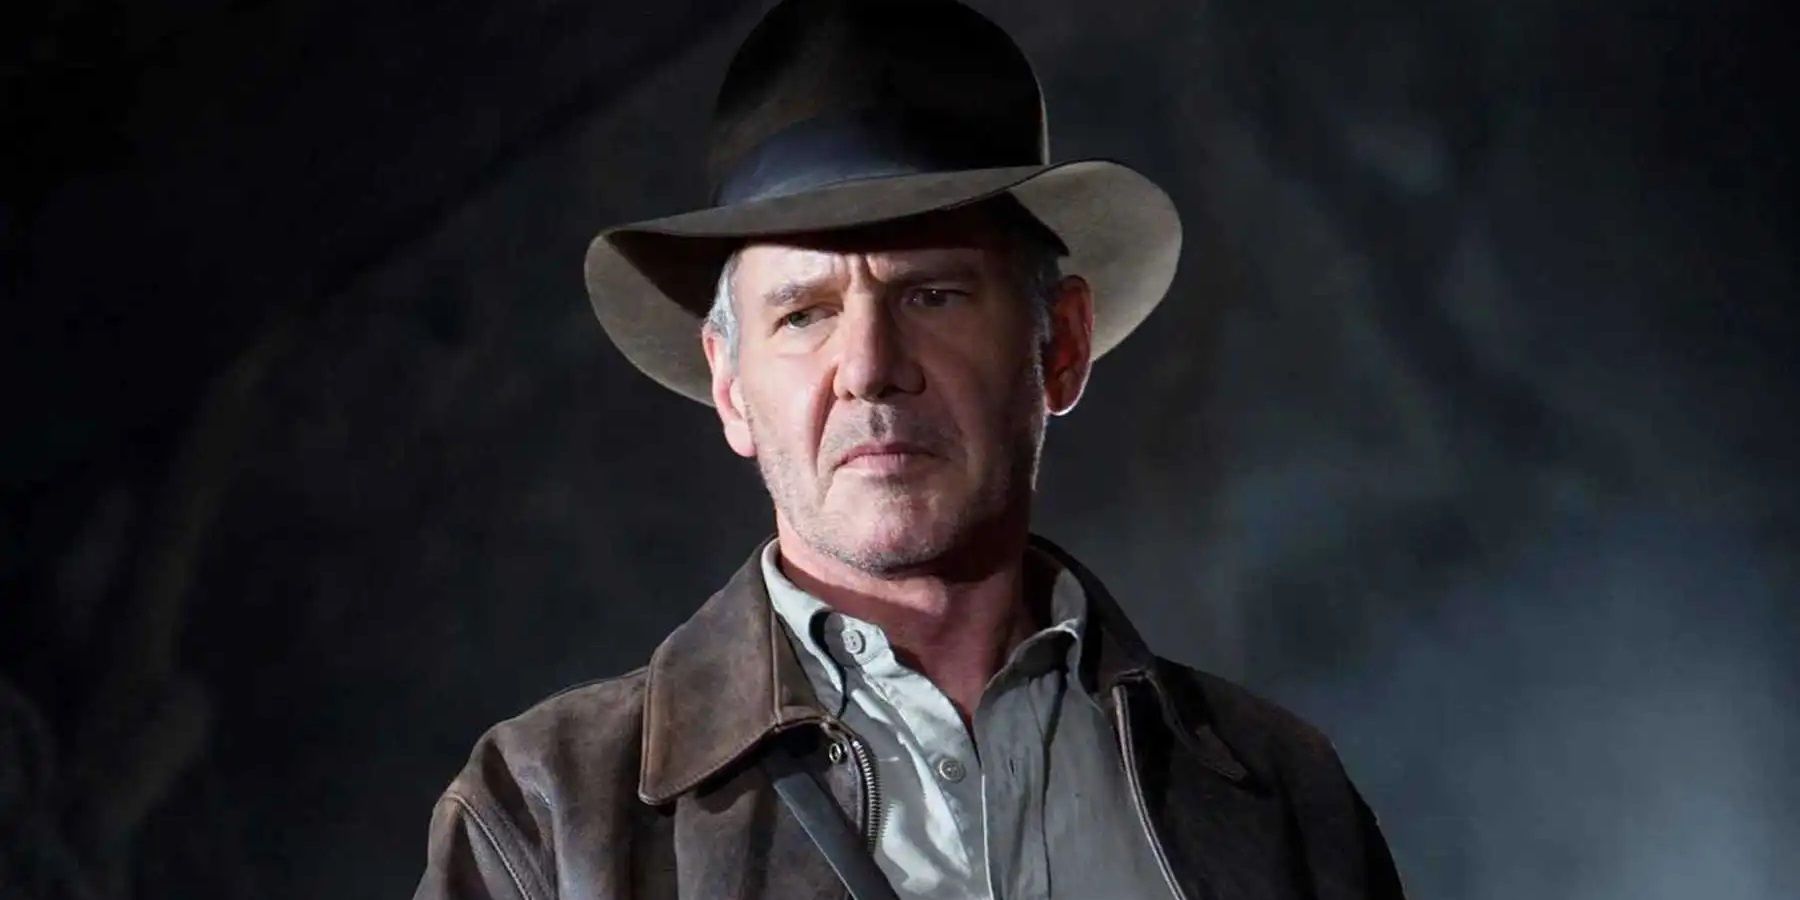 Harrison Ford scowling as Indiana Jones in Kingdom of the Crystal Skull